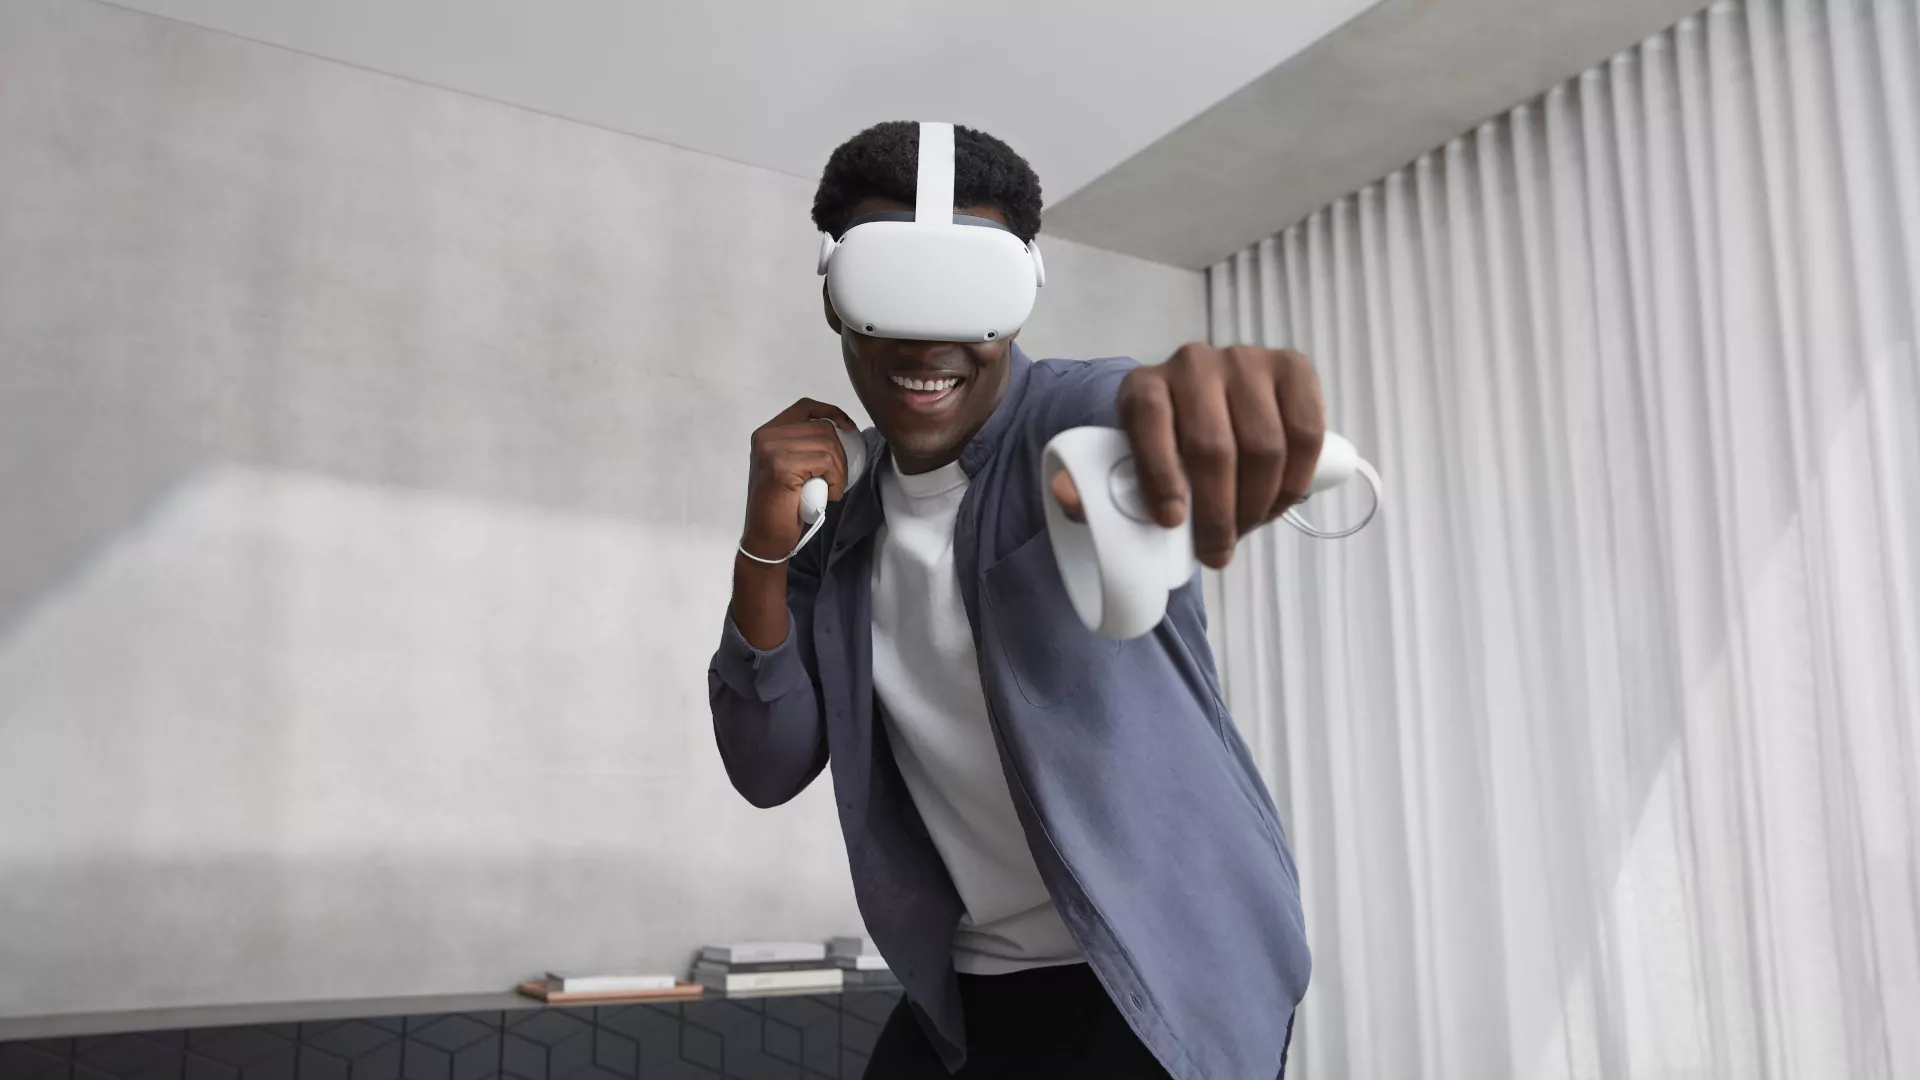 Oculus Quest 2 Boxing Games 2022 | 7+ Boxing Games